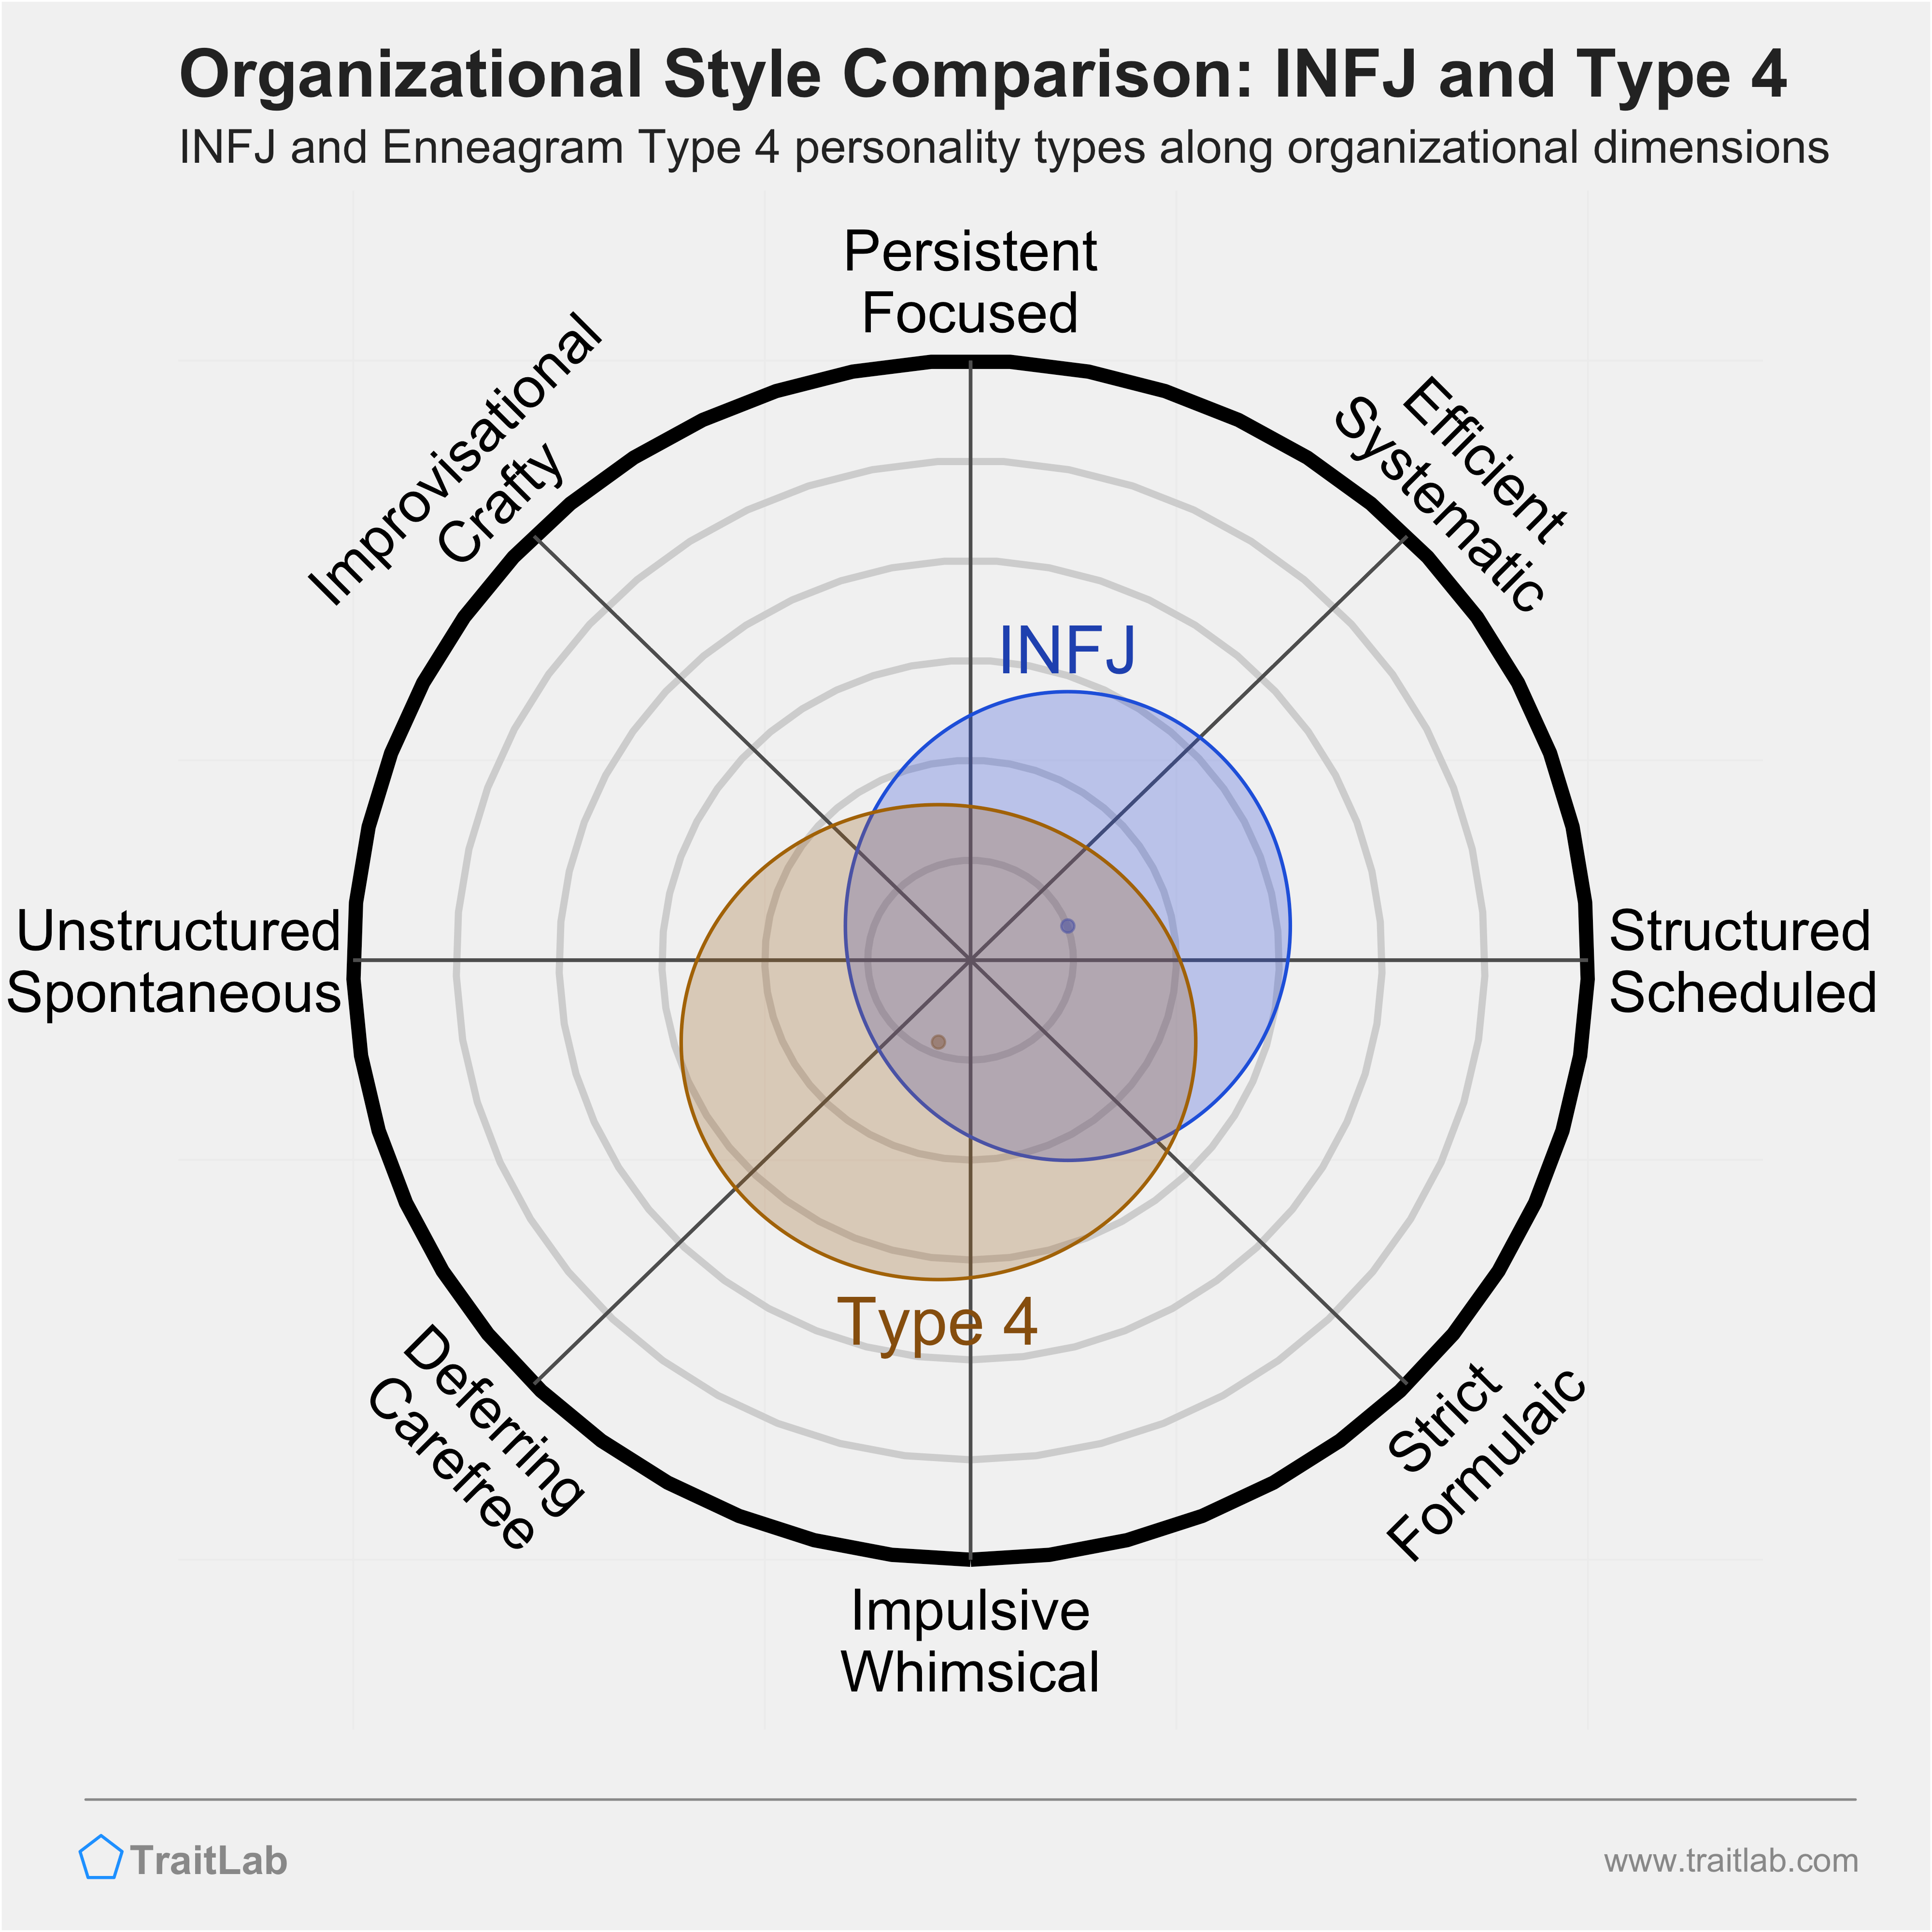 INFJ and Type 4 comparison across organizational dimensions